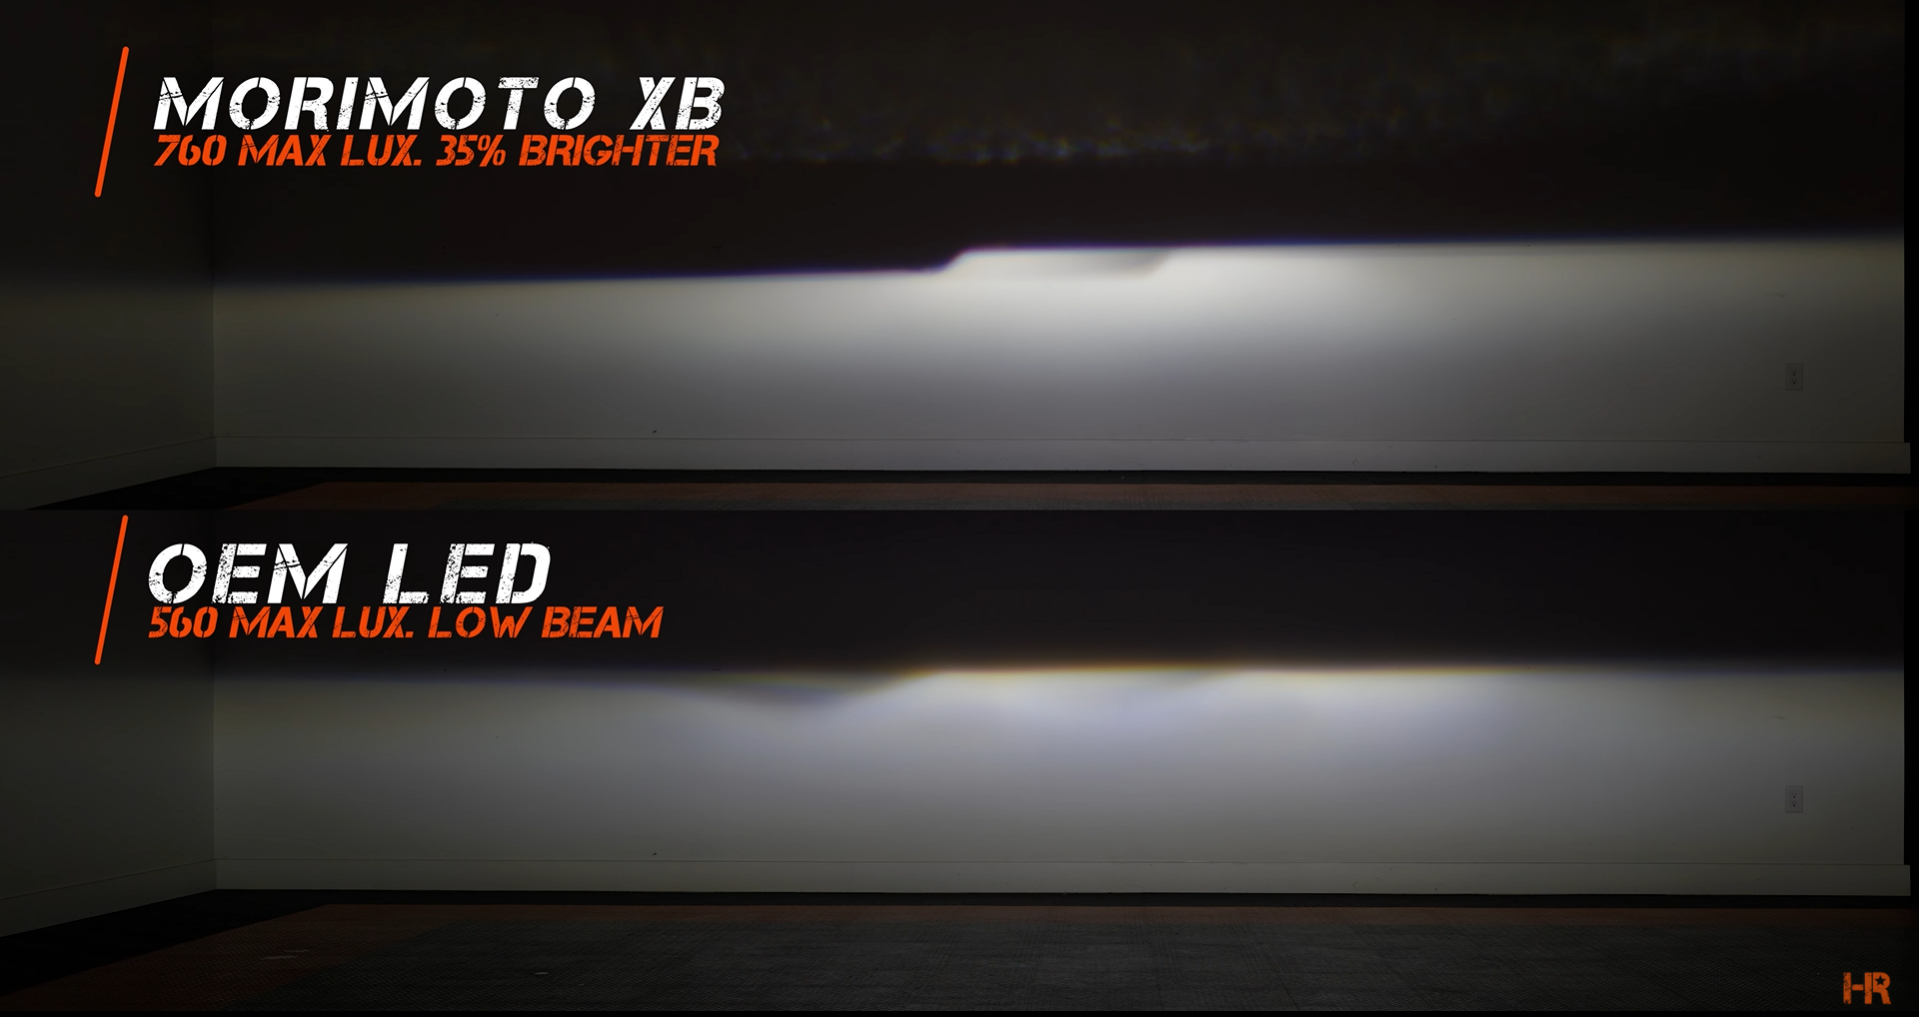 A comparison of the beam pattern between the OEM Ford Ranger LED headlight and the Morimoto XB LED headlight.